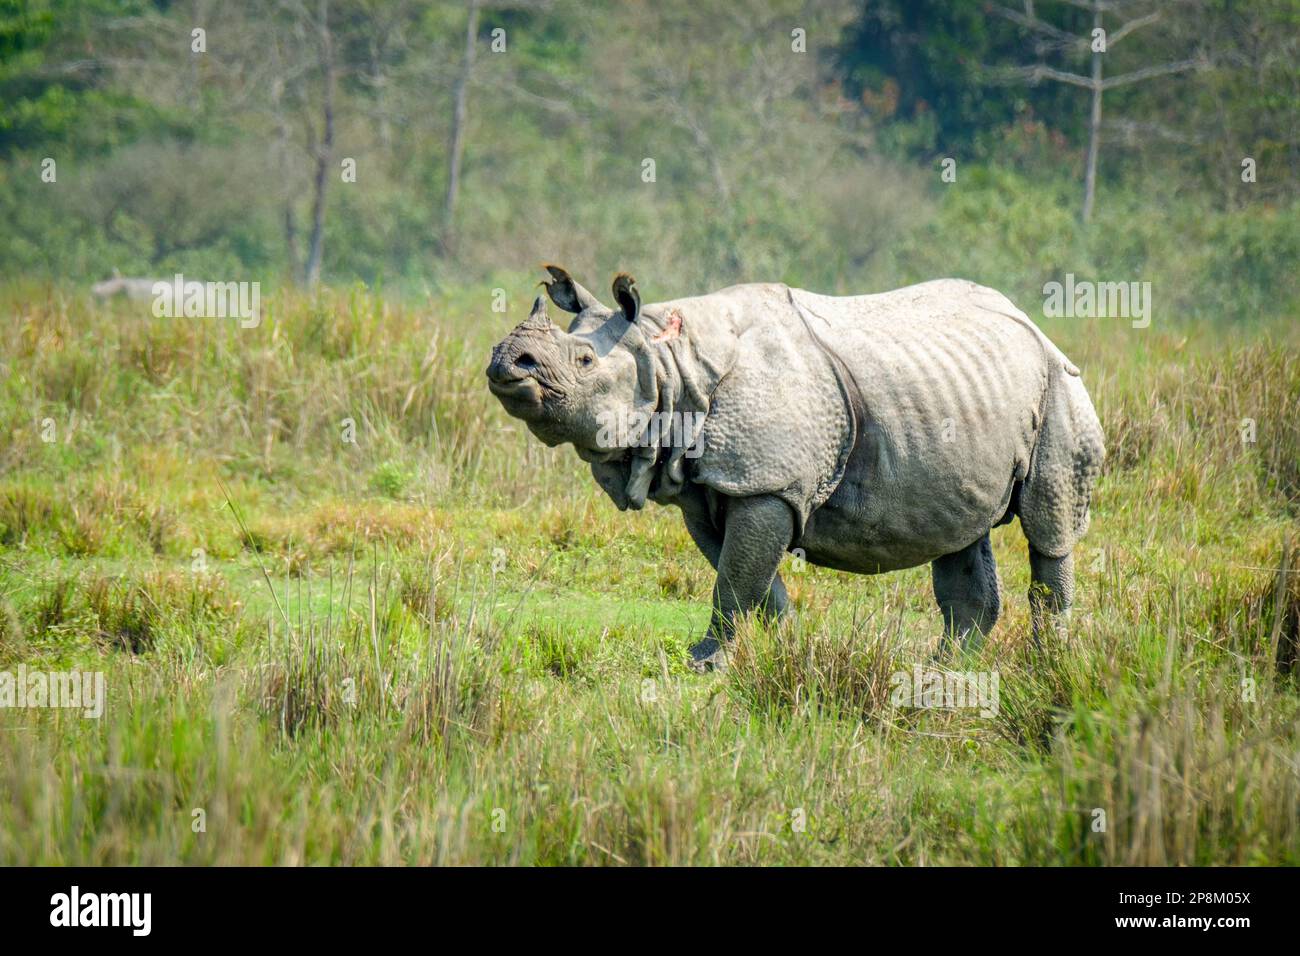 Great Indian Rhino, Rhinoceros unicornis, stands proudly in grassland cautiously observing for tigers. Kaziranga National Park, Assam, India Stock Photo